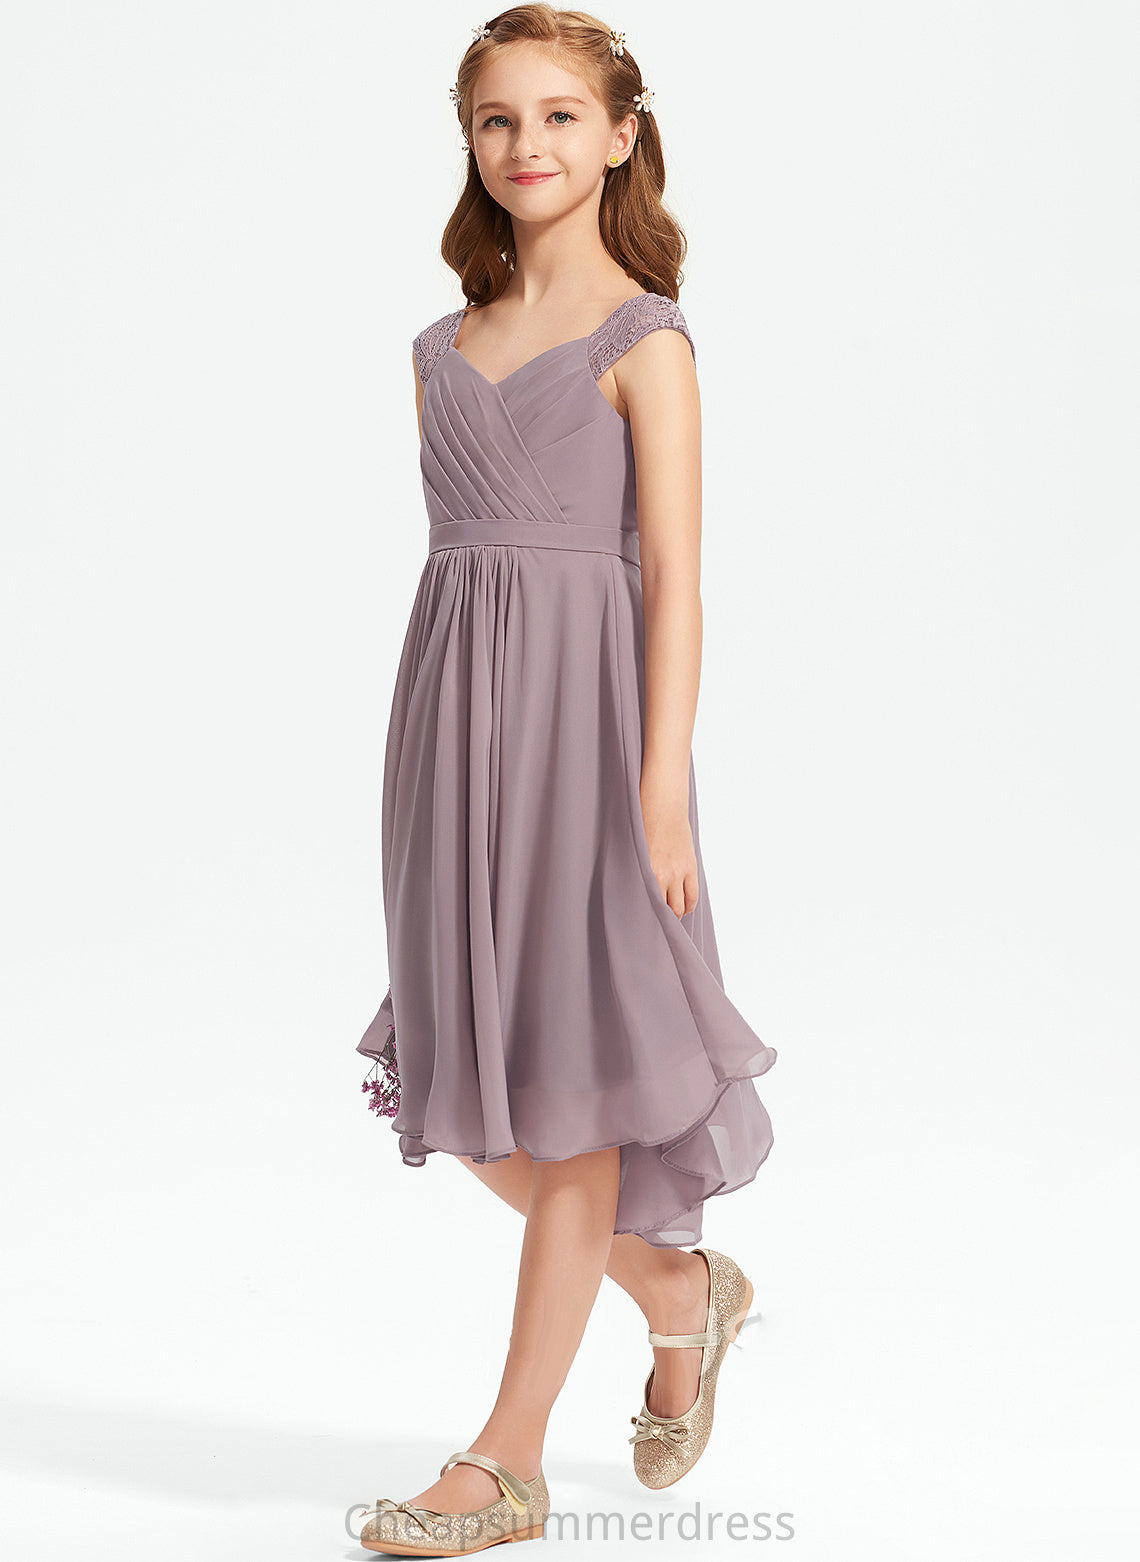 Junior Bridesmaid Dresses Knee-Length A-Line Lace V-neck Campbell Ruffle With Chiffon